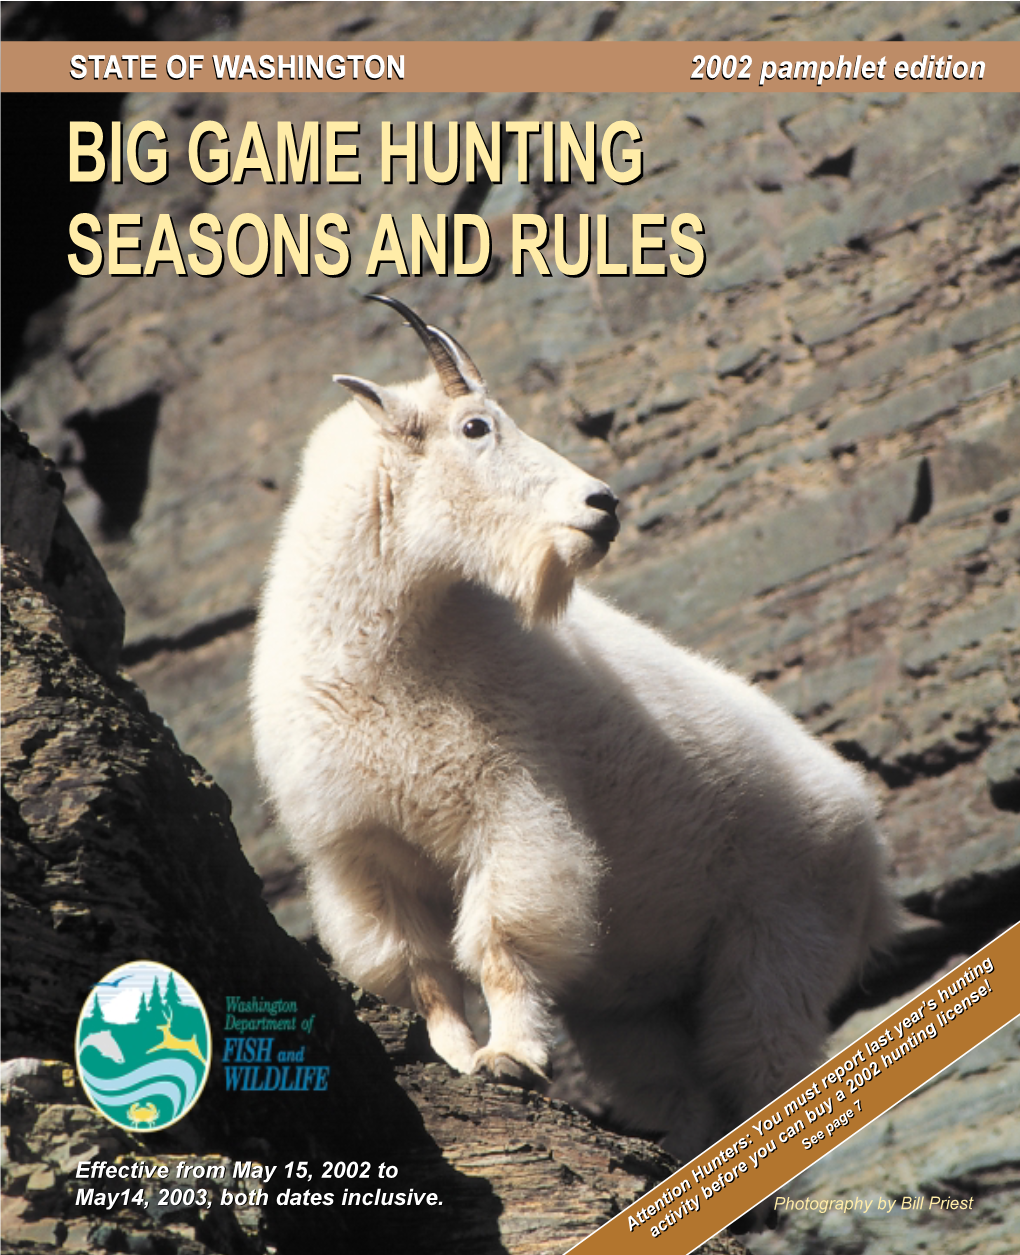 2002 Big Game Hunting Seasons and Rules Pamphlet DocsLib